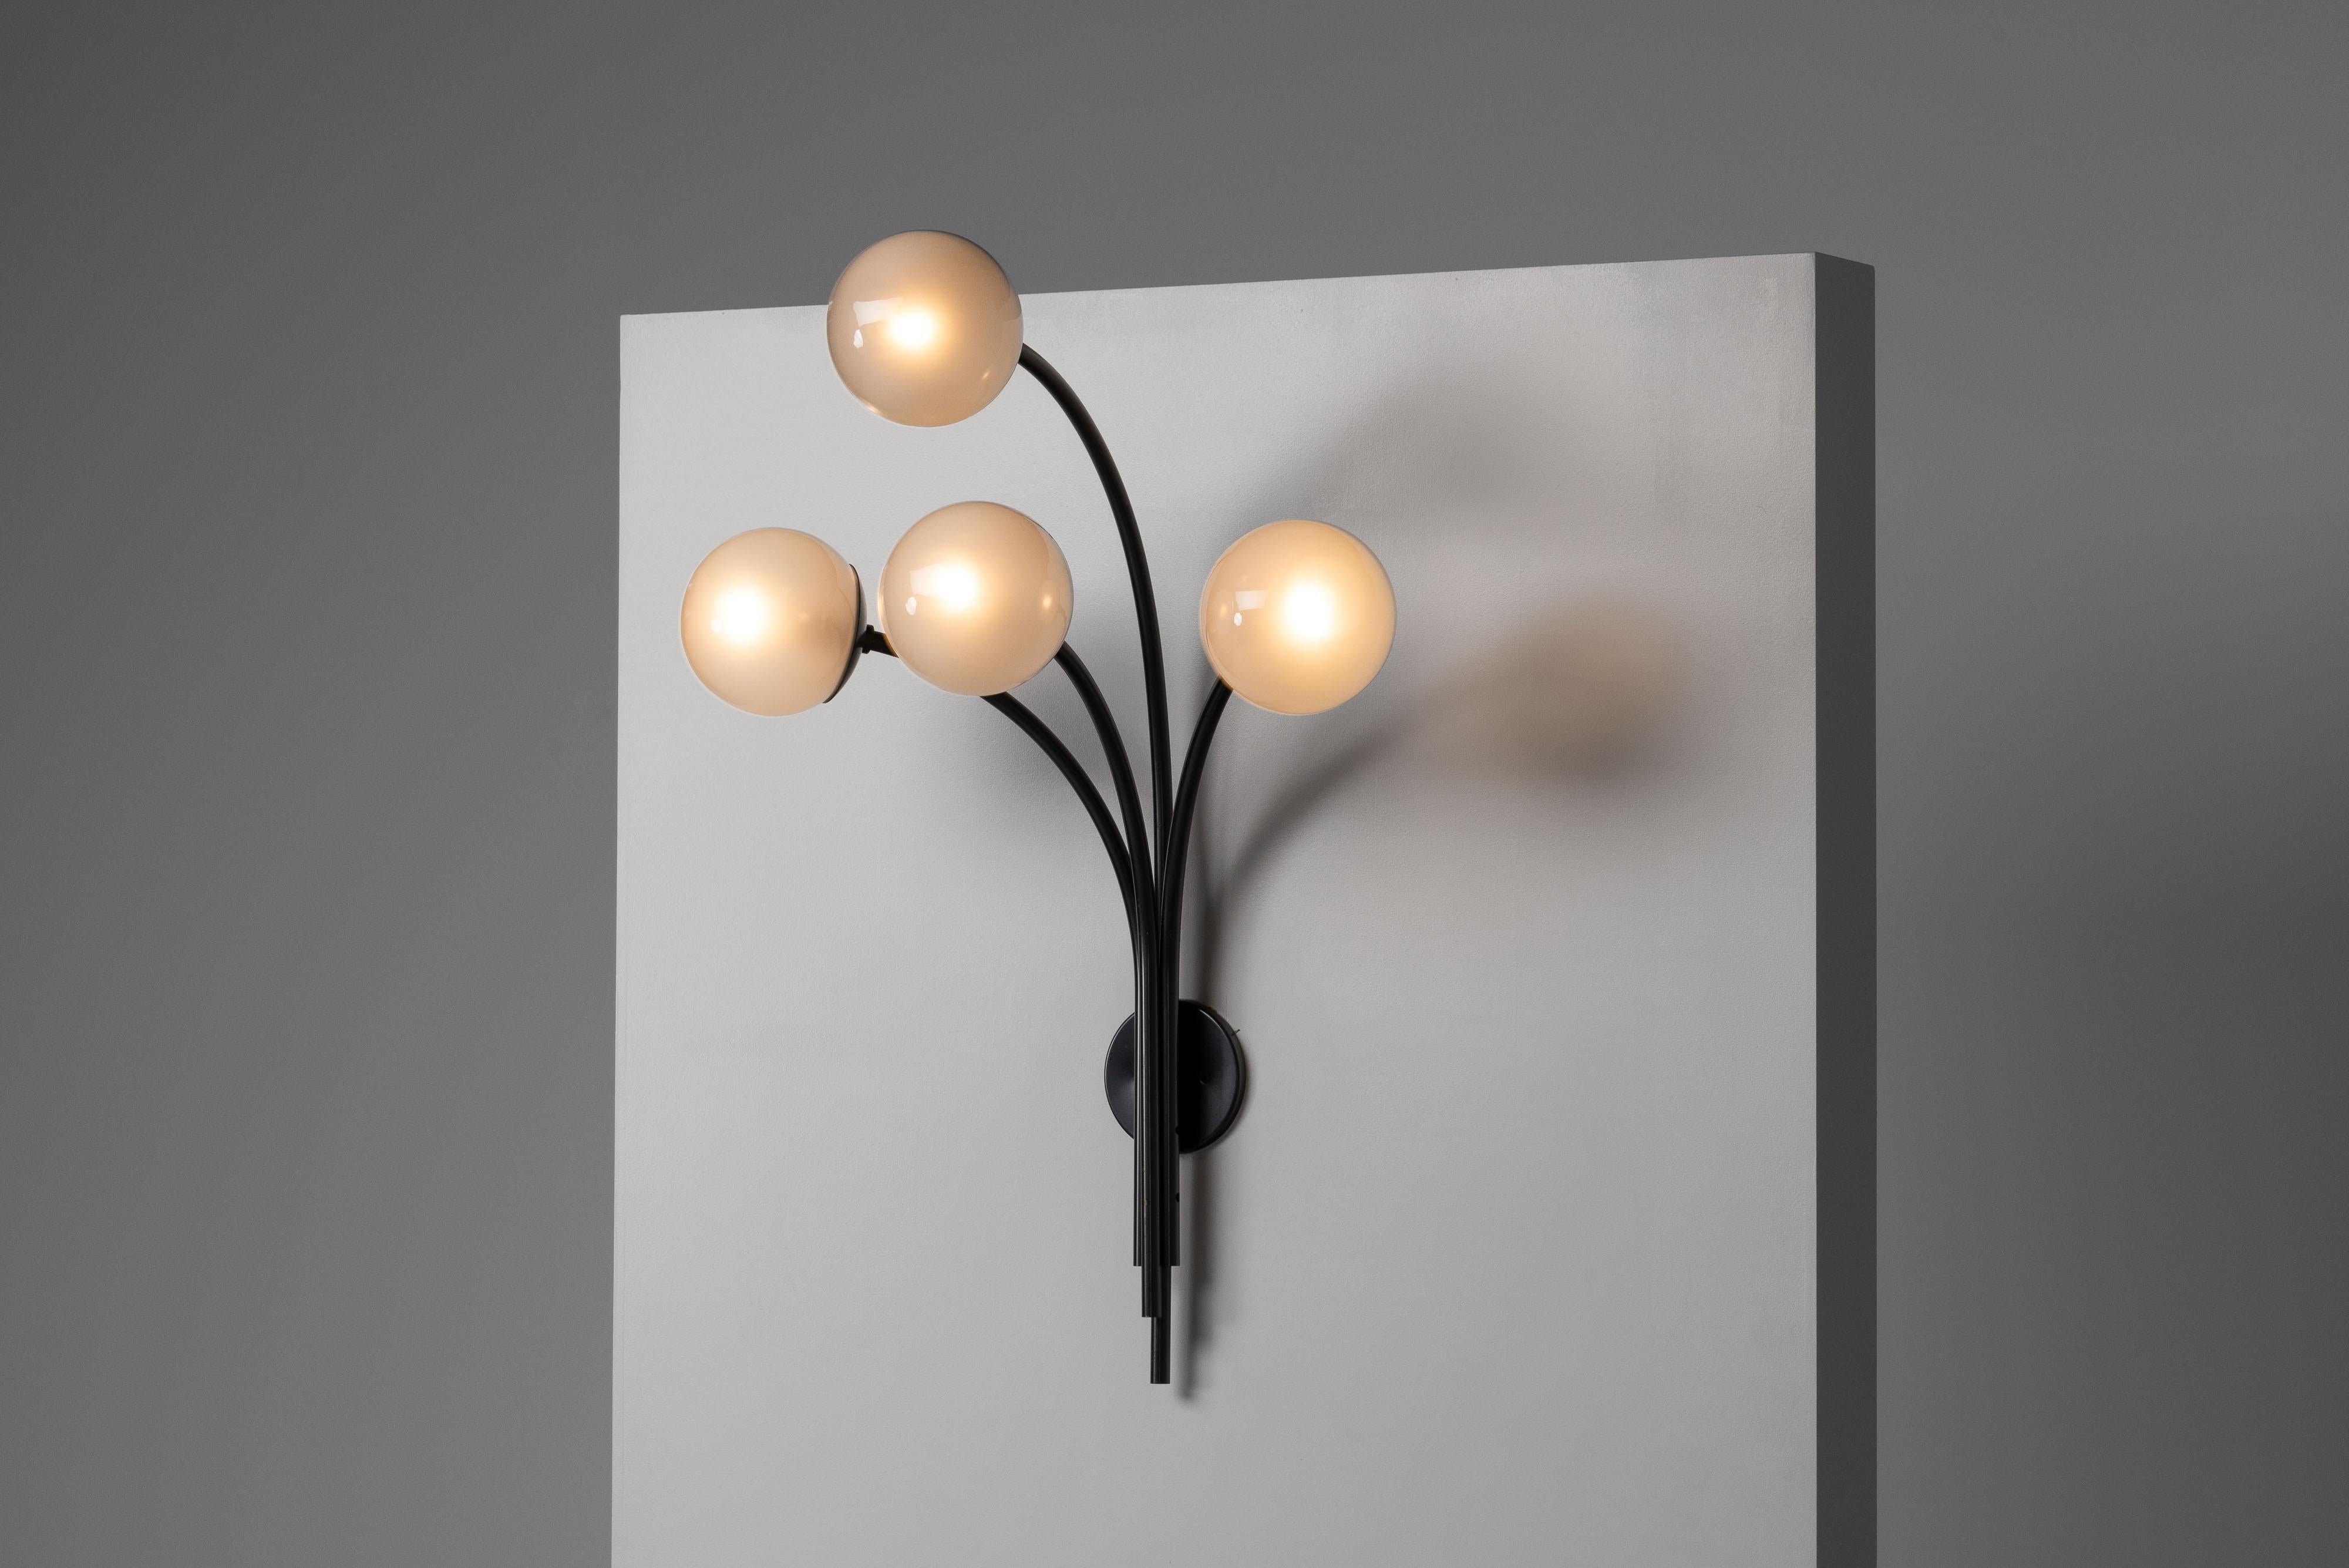 Rare large wall lamp model 257 designed by Sergio Asti and manufactured by Arteluce in Italy in 1966. Under the watchful eye of Gino Sarfatti, this lamp was brought to life. You can definitely see his influence in the design. The lamp has four arms,